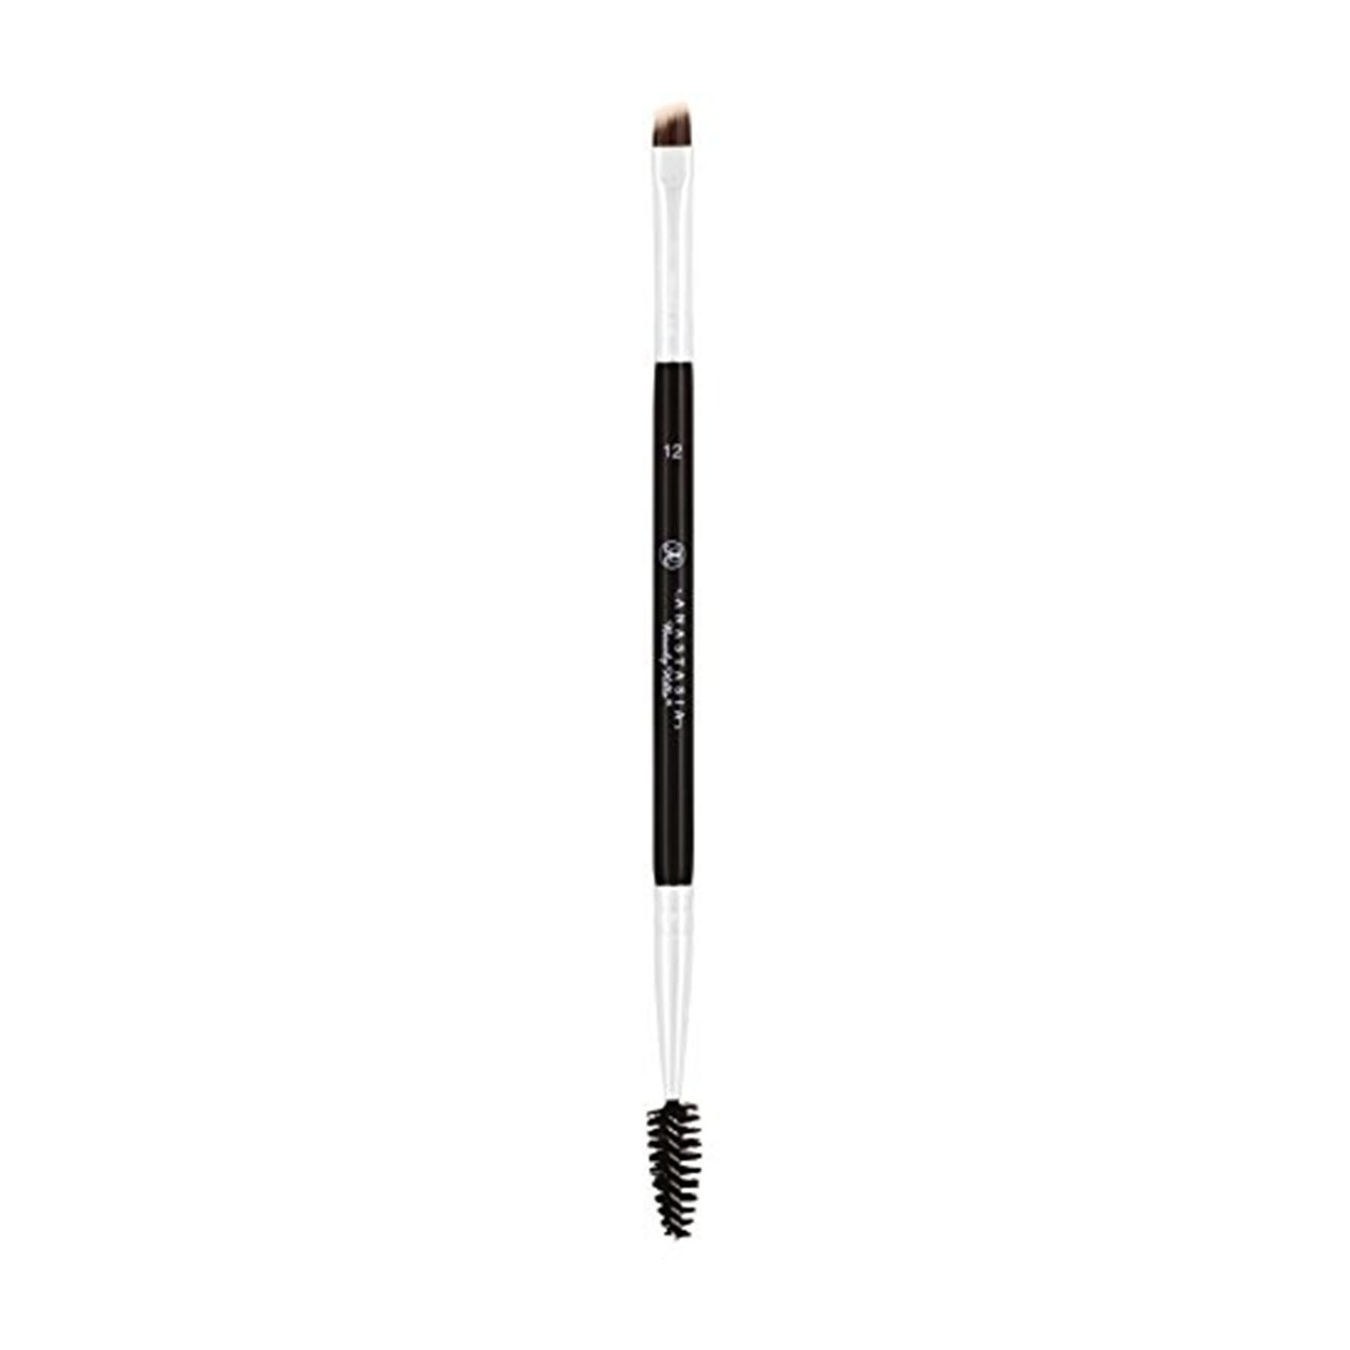 ANASTASIA BEVERLY HILLS Dual Ended Firm Ended Brush 12 Pinsel 1ST von Anastasia Beverly Hills